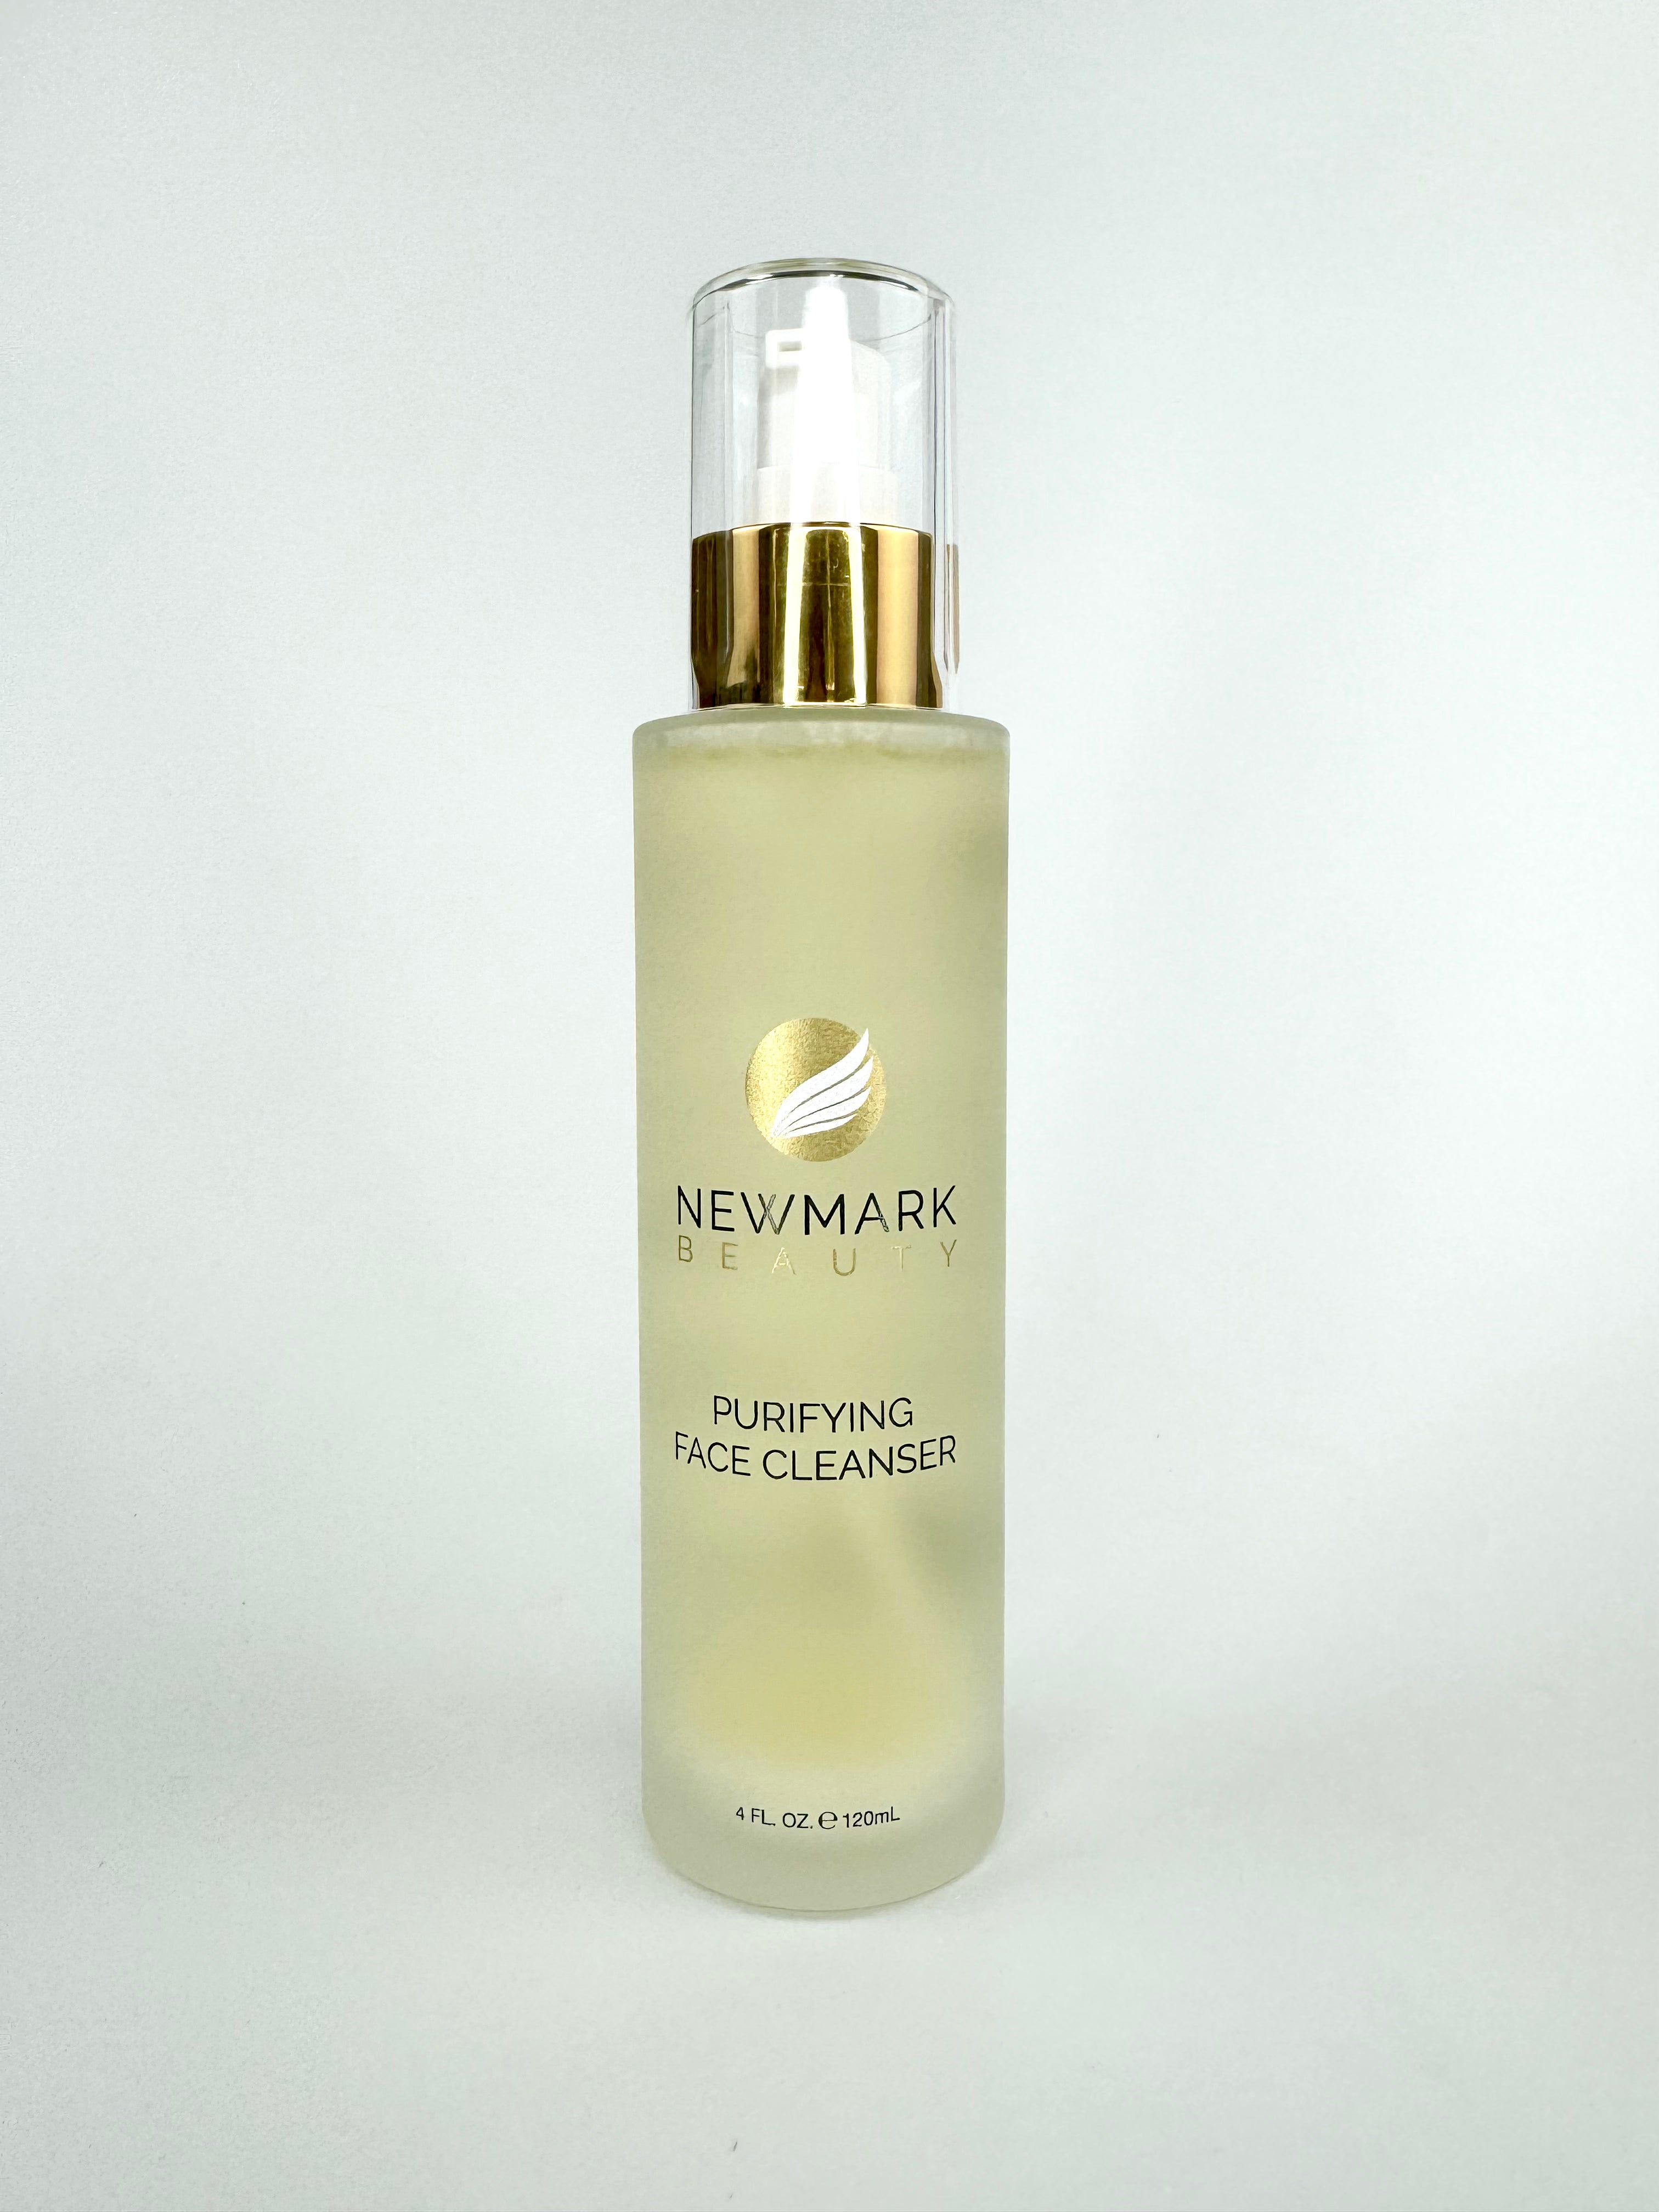 Purifying Face Cleanser by Newmark Beauty